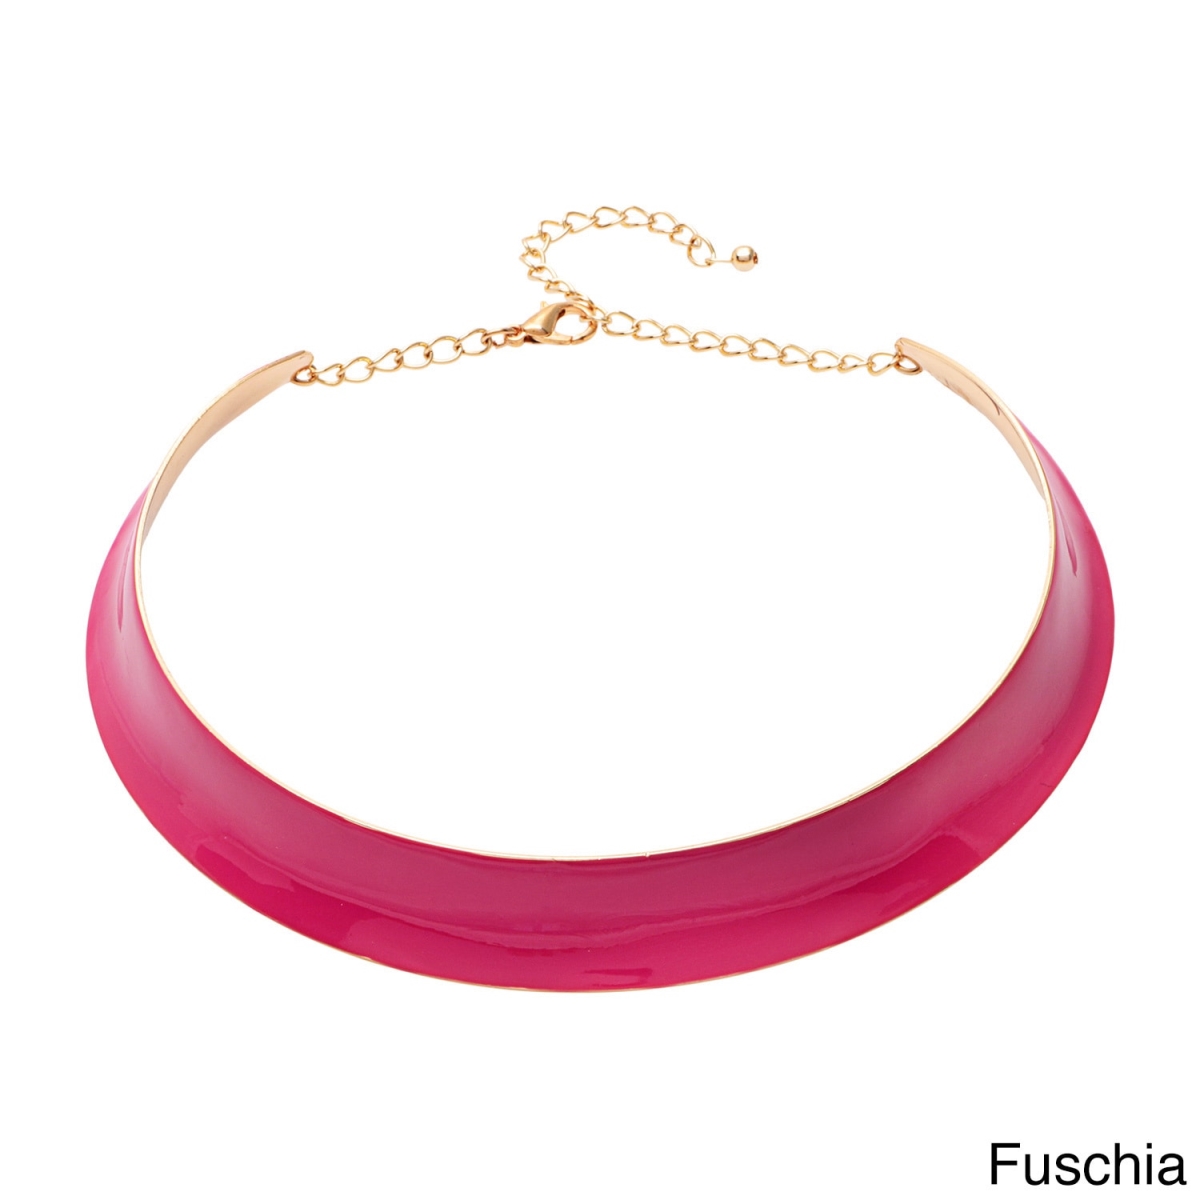 Picture of J&H Designs 6277-N-Fuschia Brights Hammered Colar Necklace